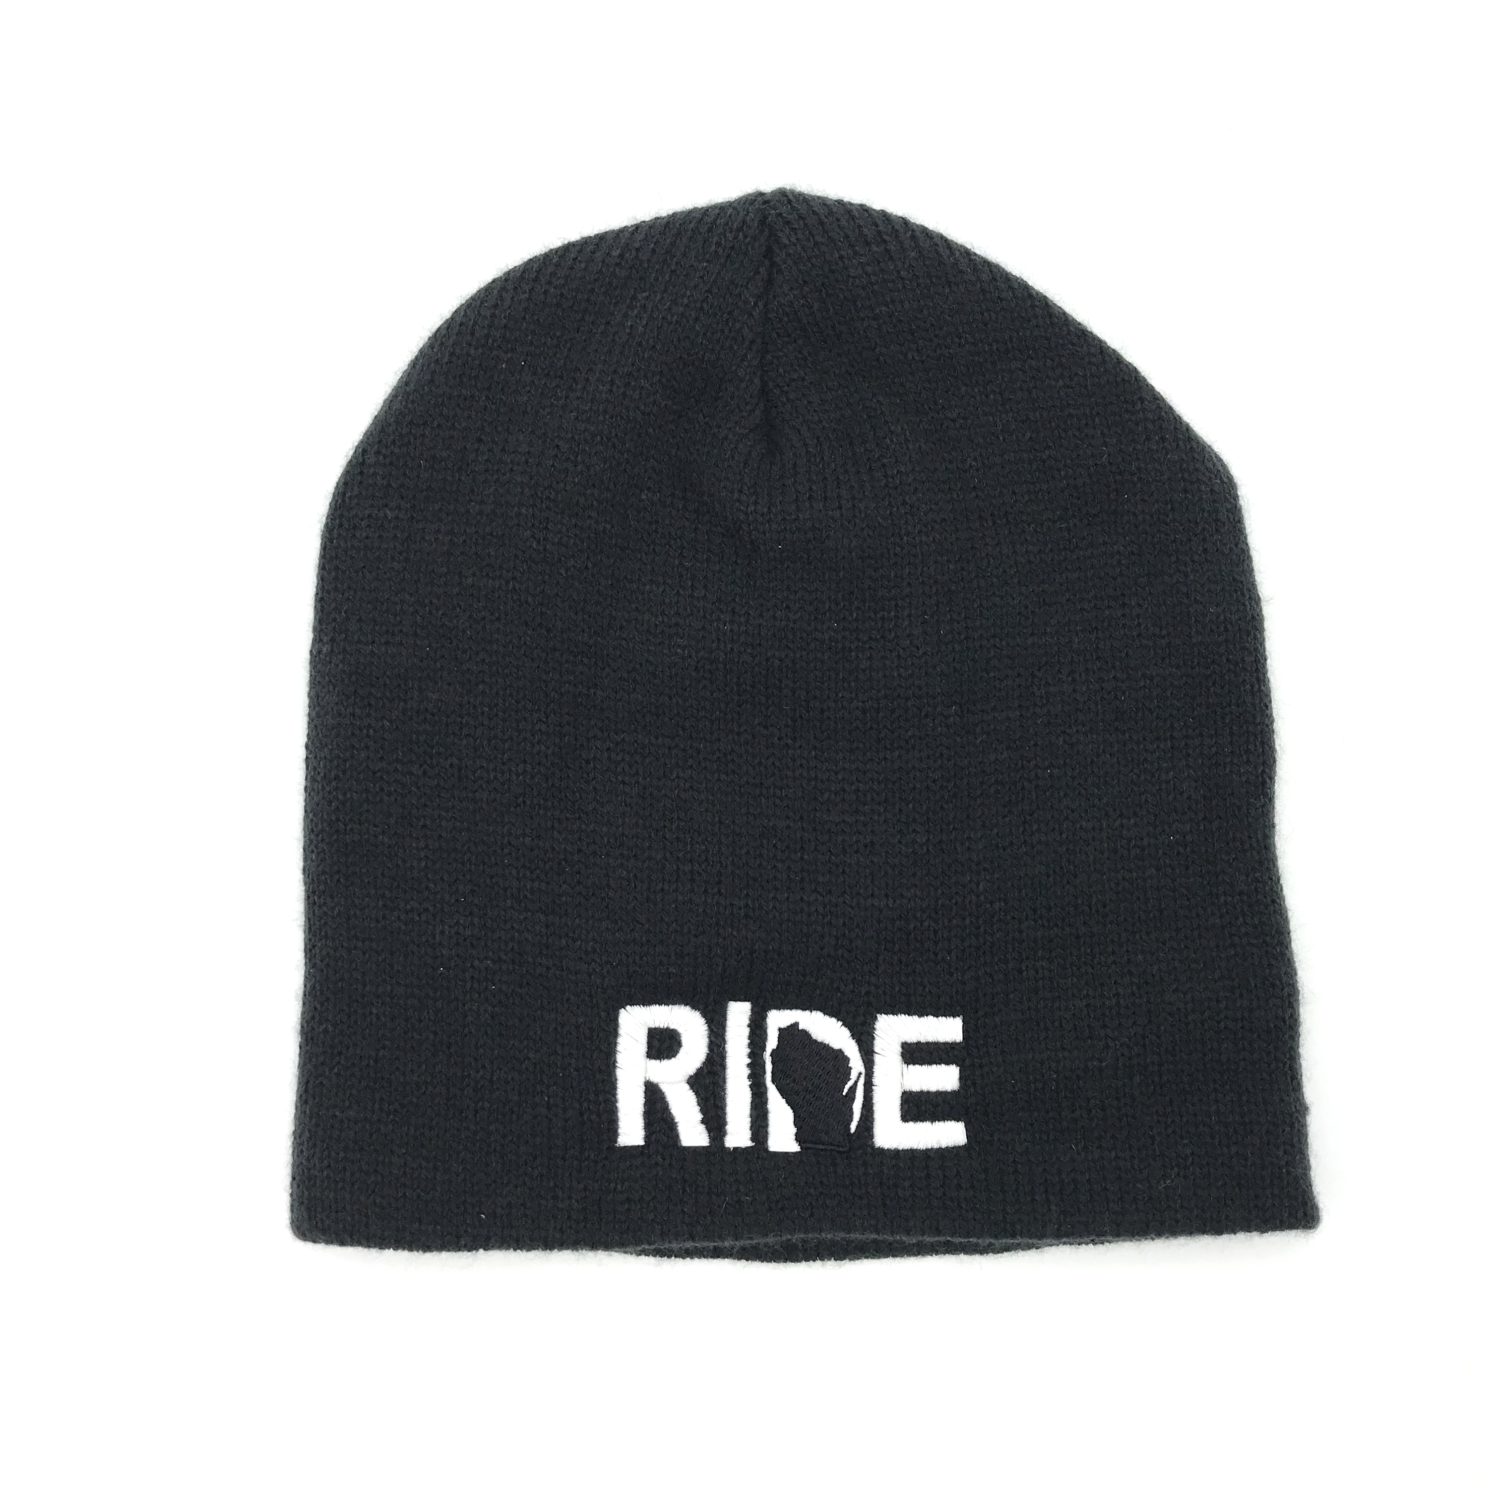 Ride Wisconsin Night Out Embroidered Beanie Skully Black/White